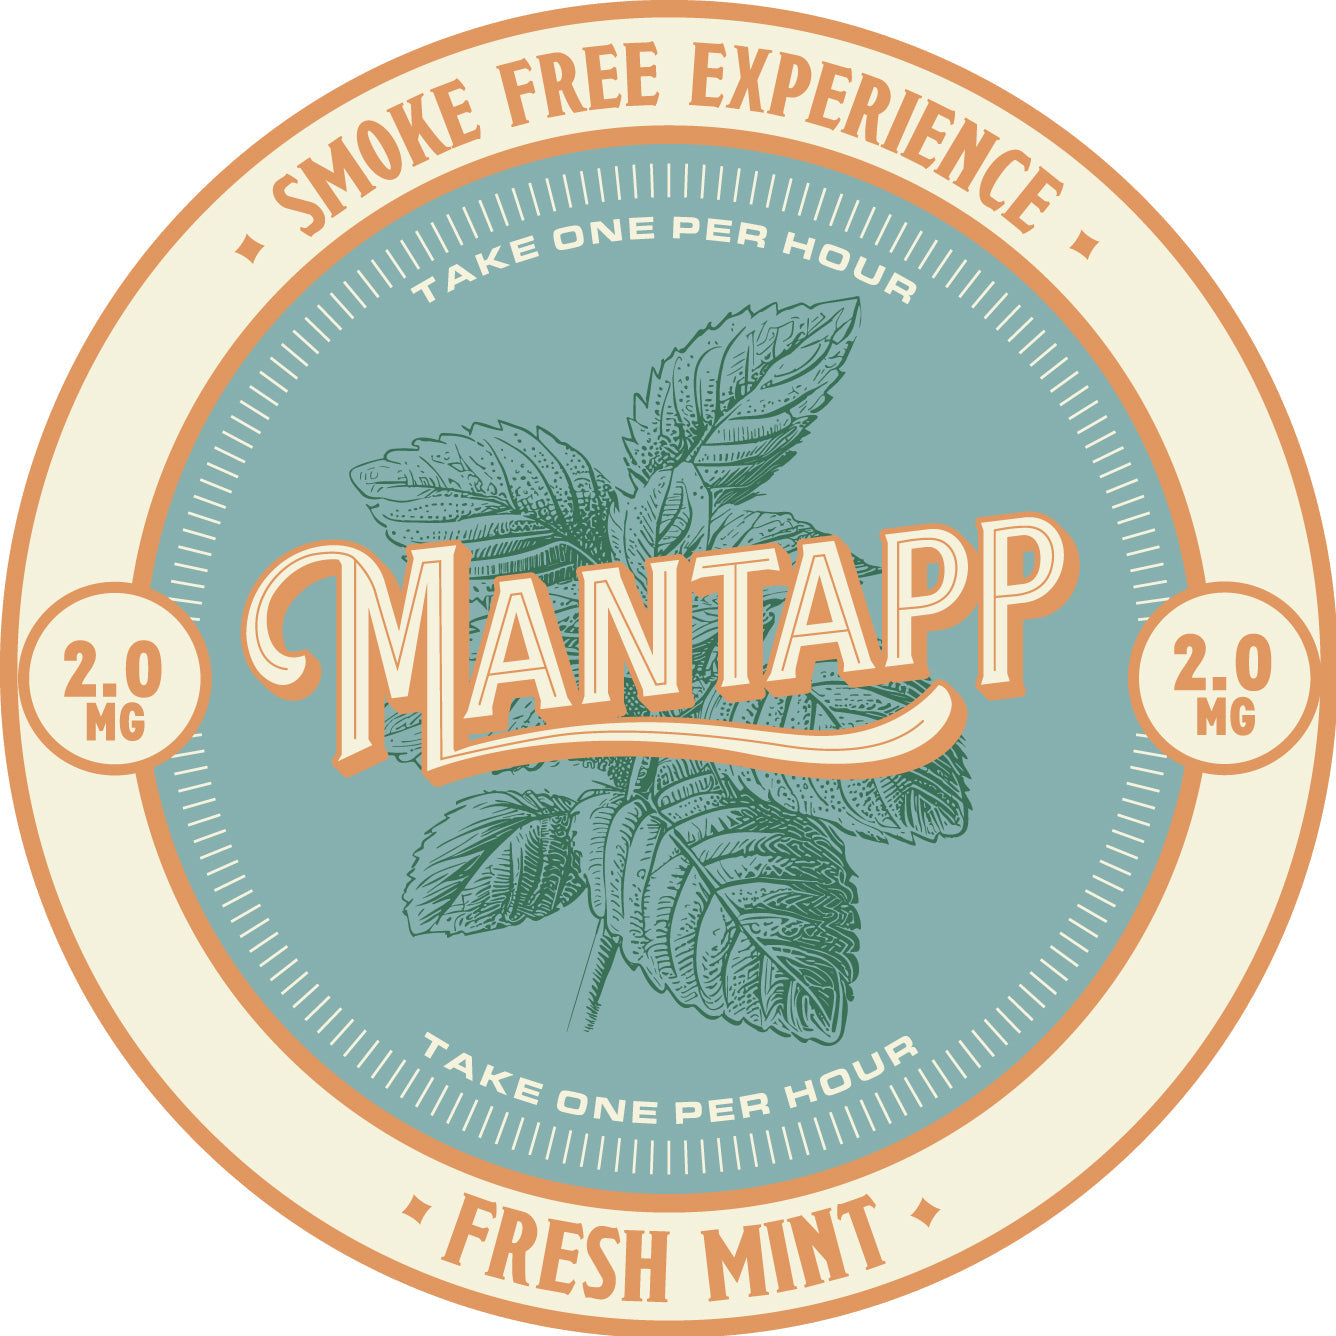 2. Mantapp Nicotine Pouch - Fresh Mint 2mg    (5 Pack)